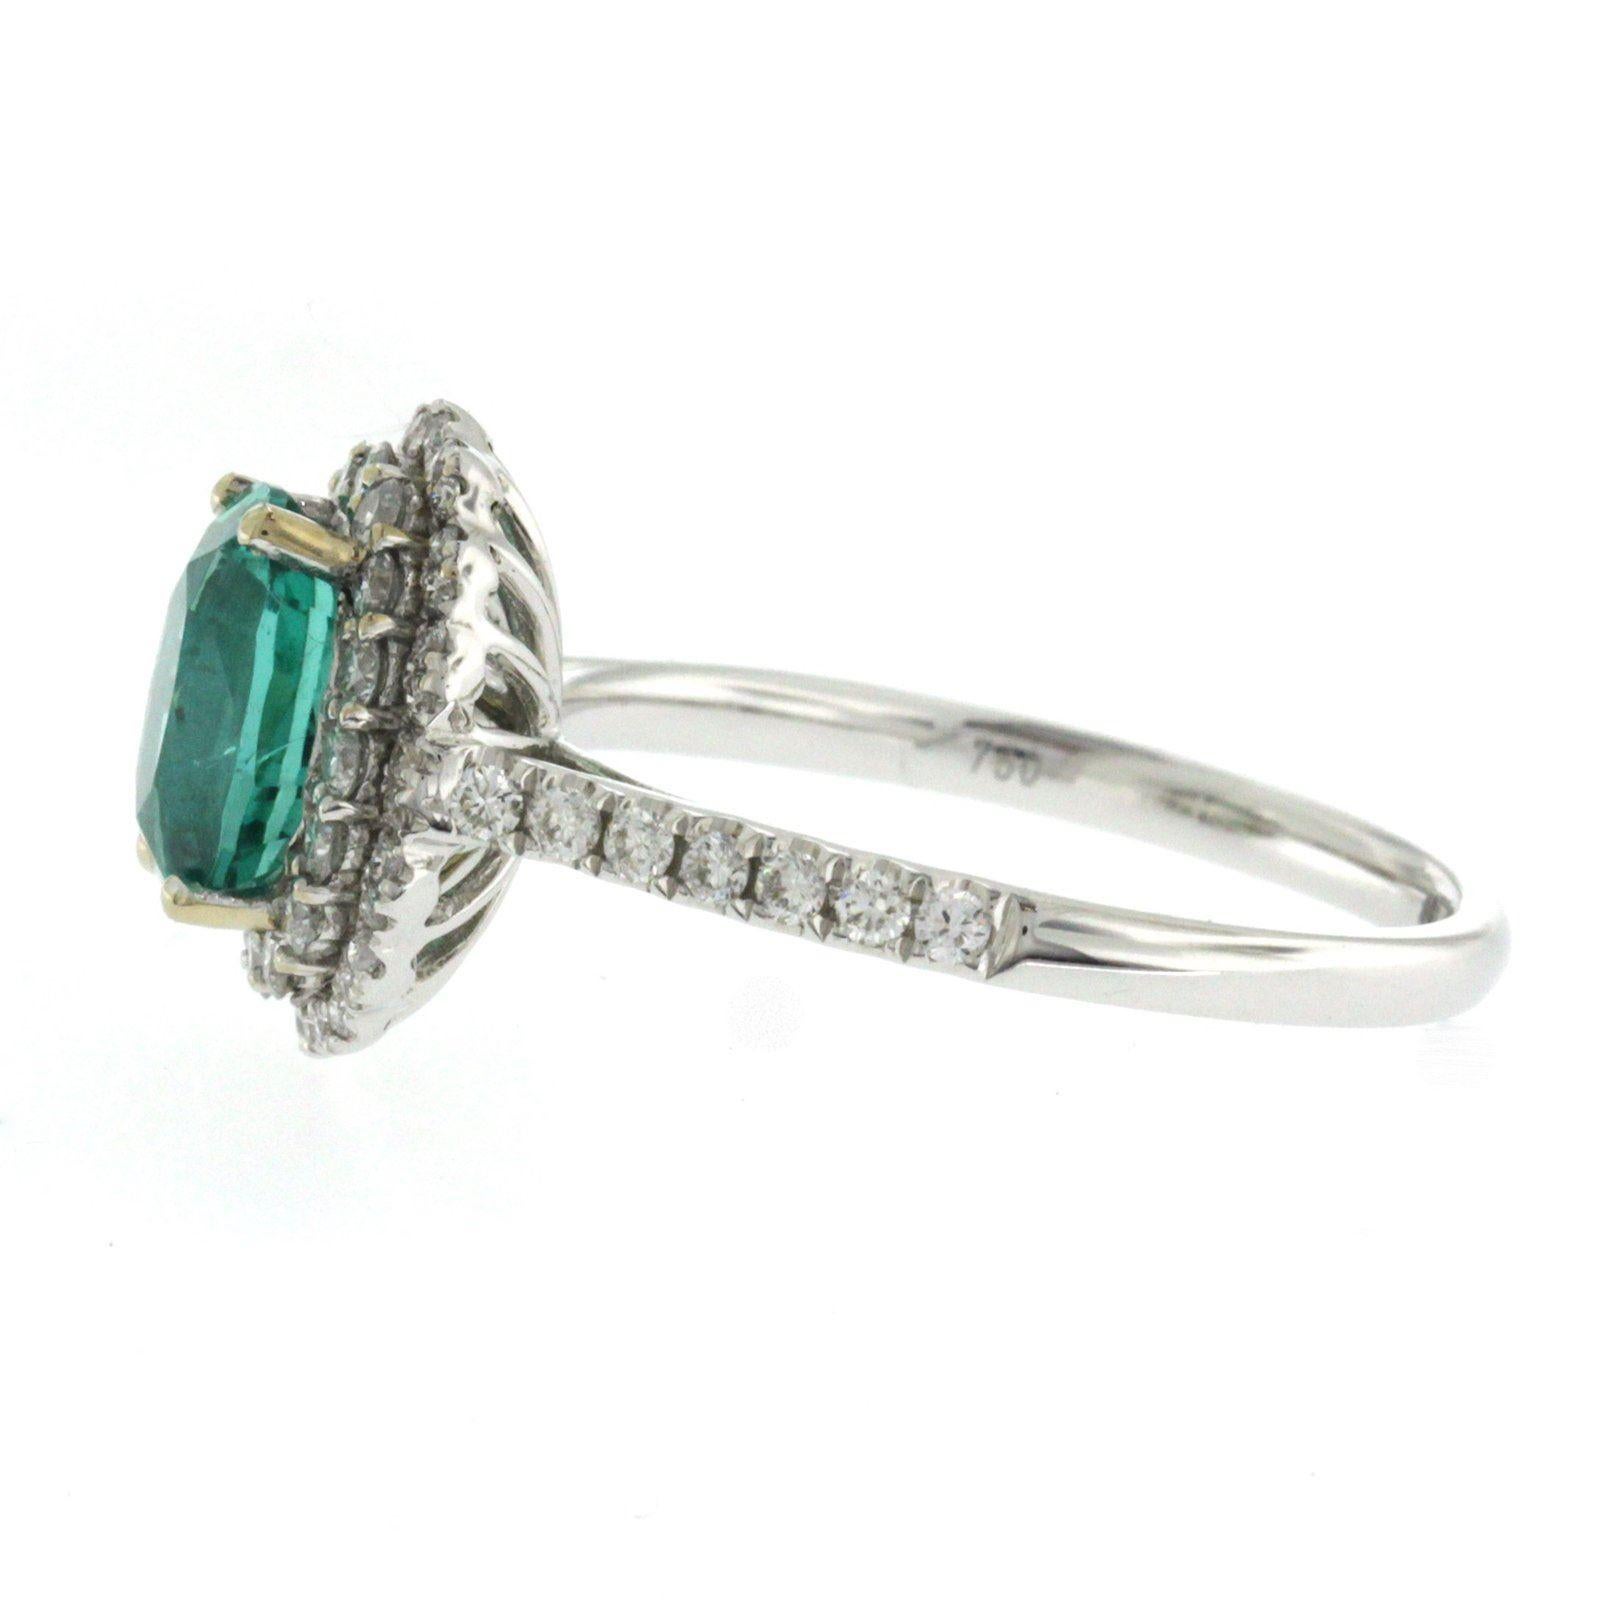 1.28 CT African Emerald & 0.79 CT Diamonds in 18K White Gold Engagement Ring In New Condition For Sale In Los Angeles, CA